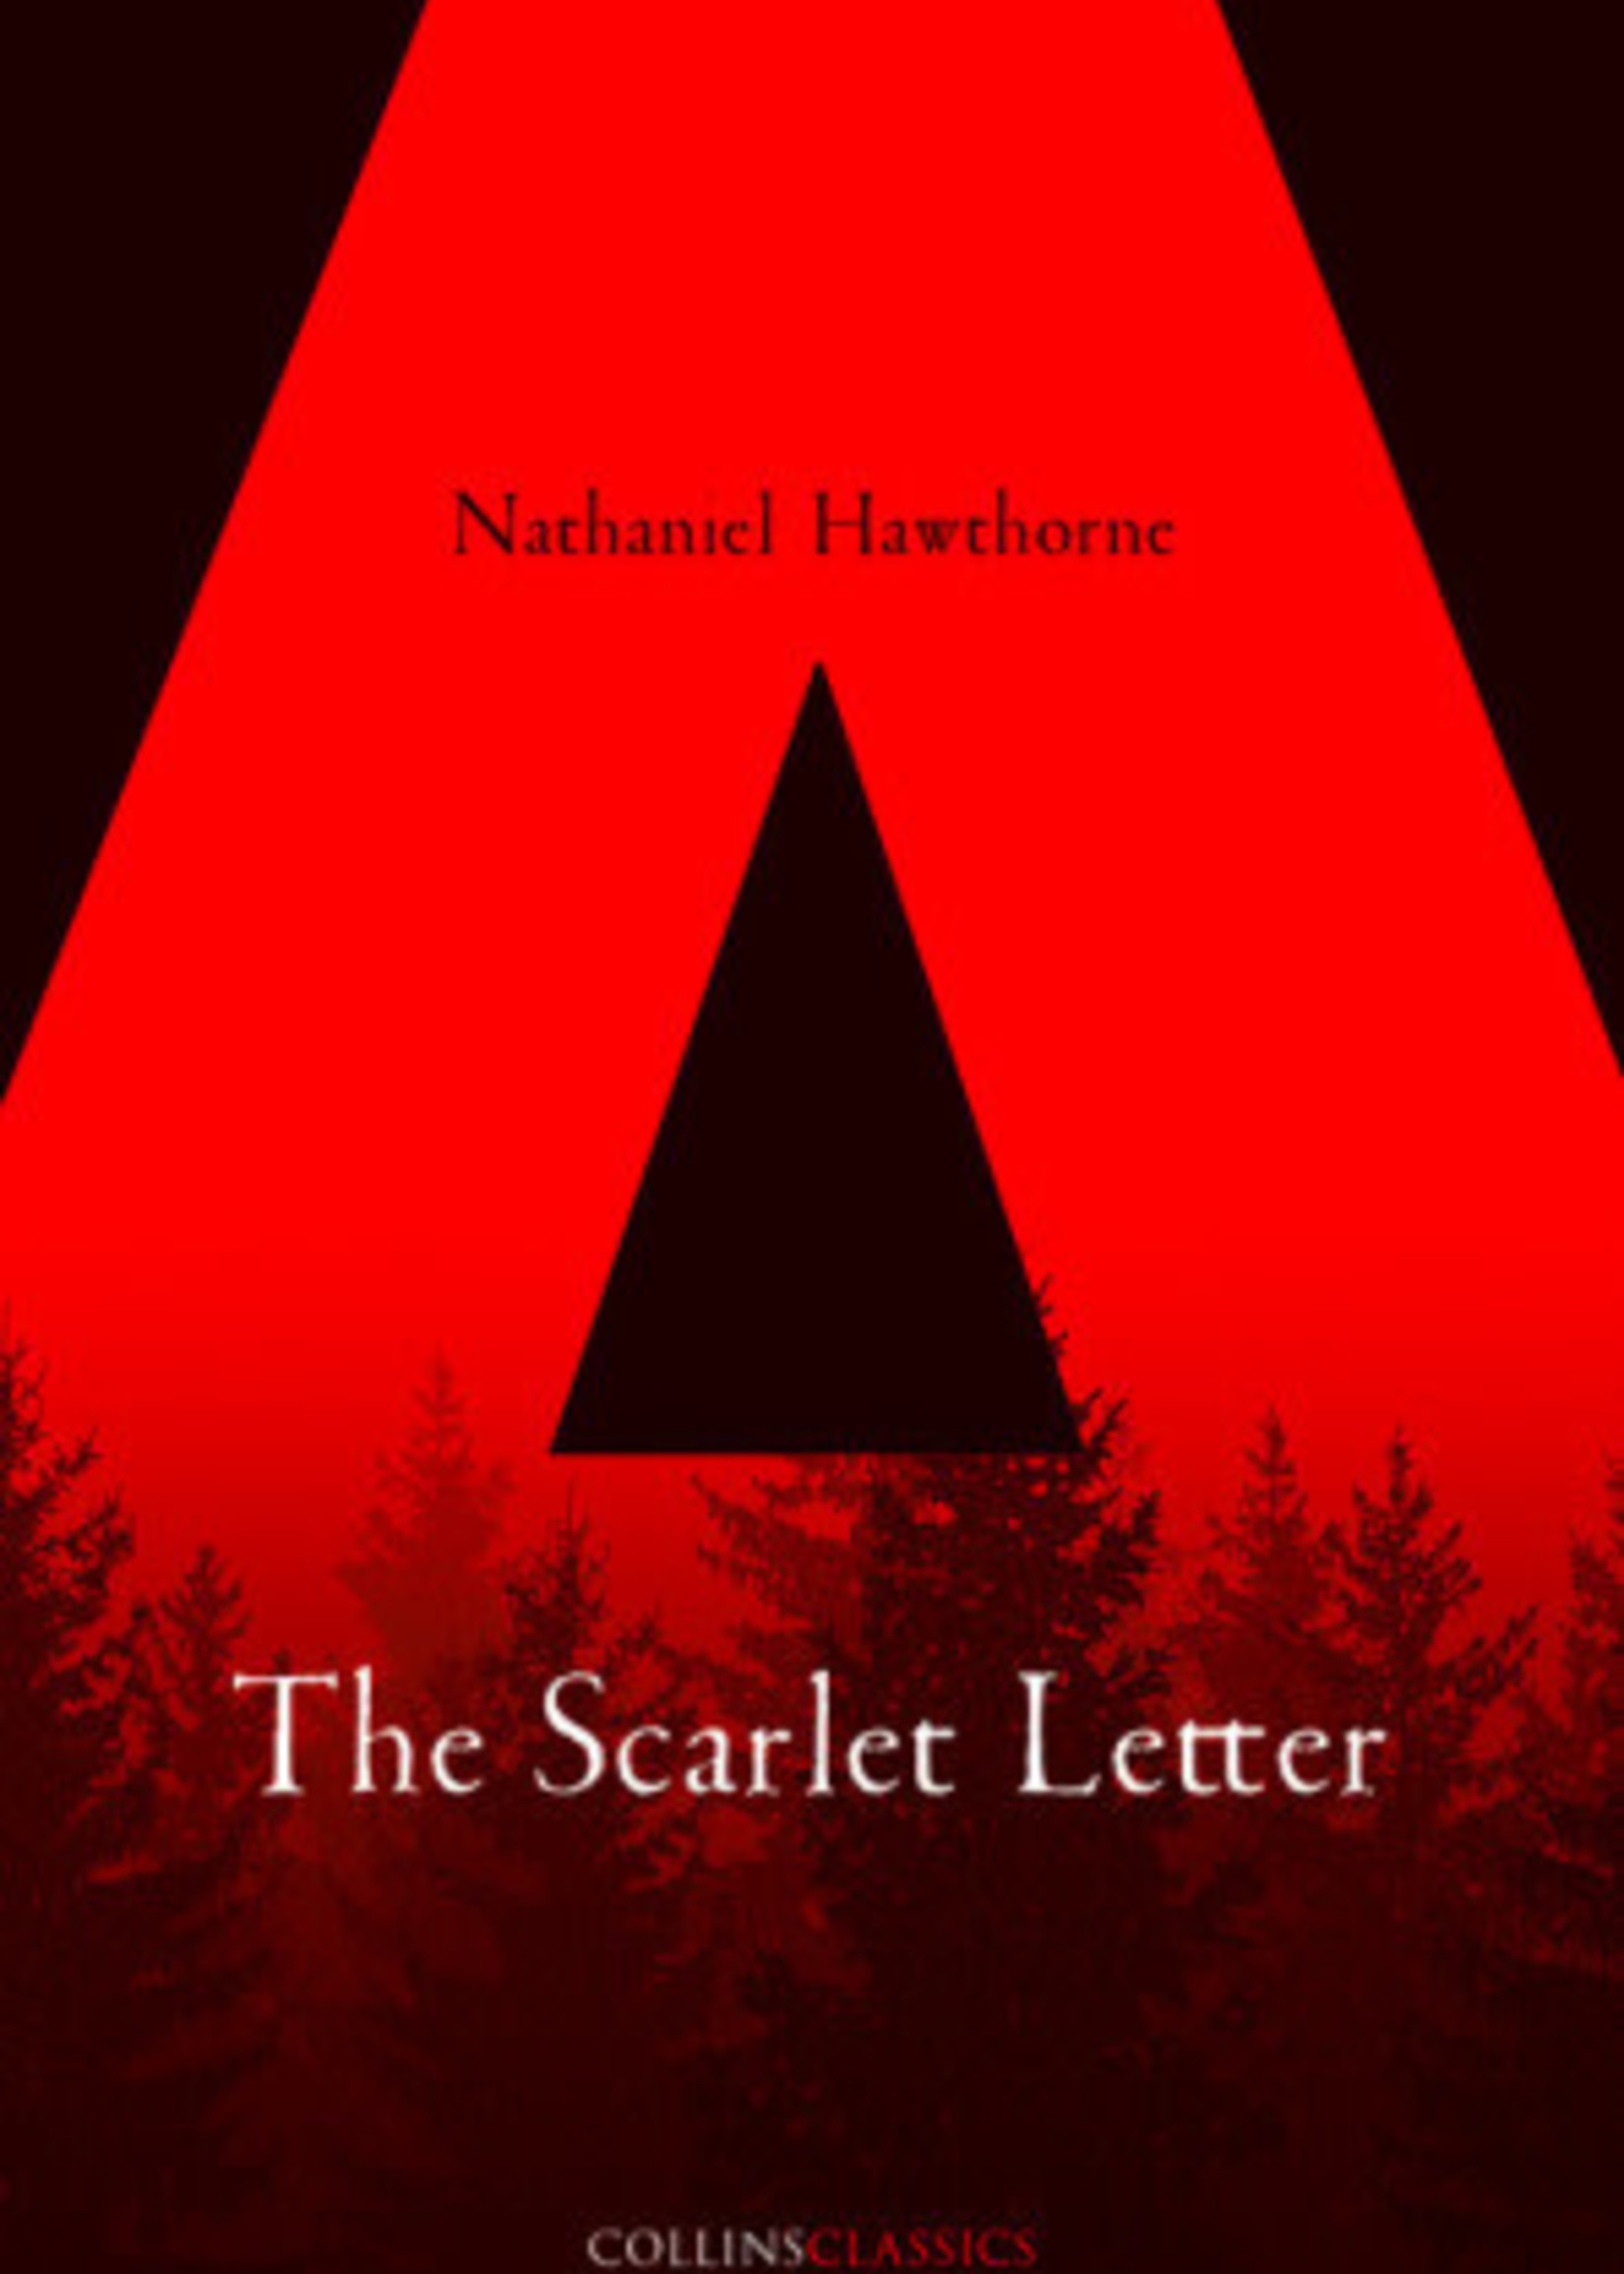 The Scarlet Letter by Nathaniel Hawthorne